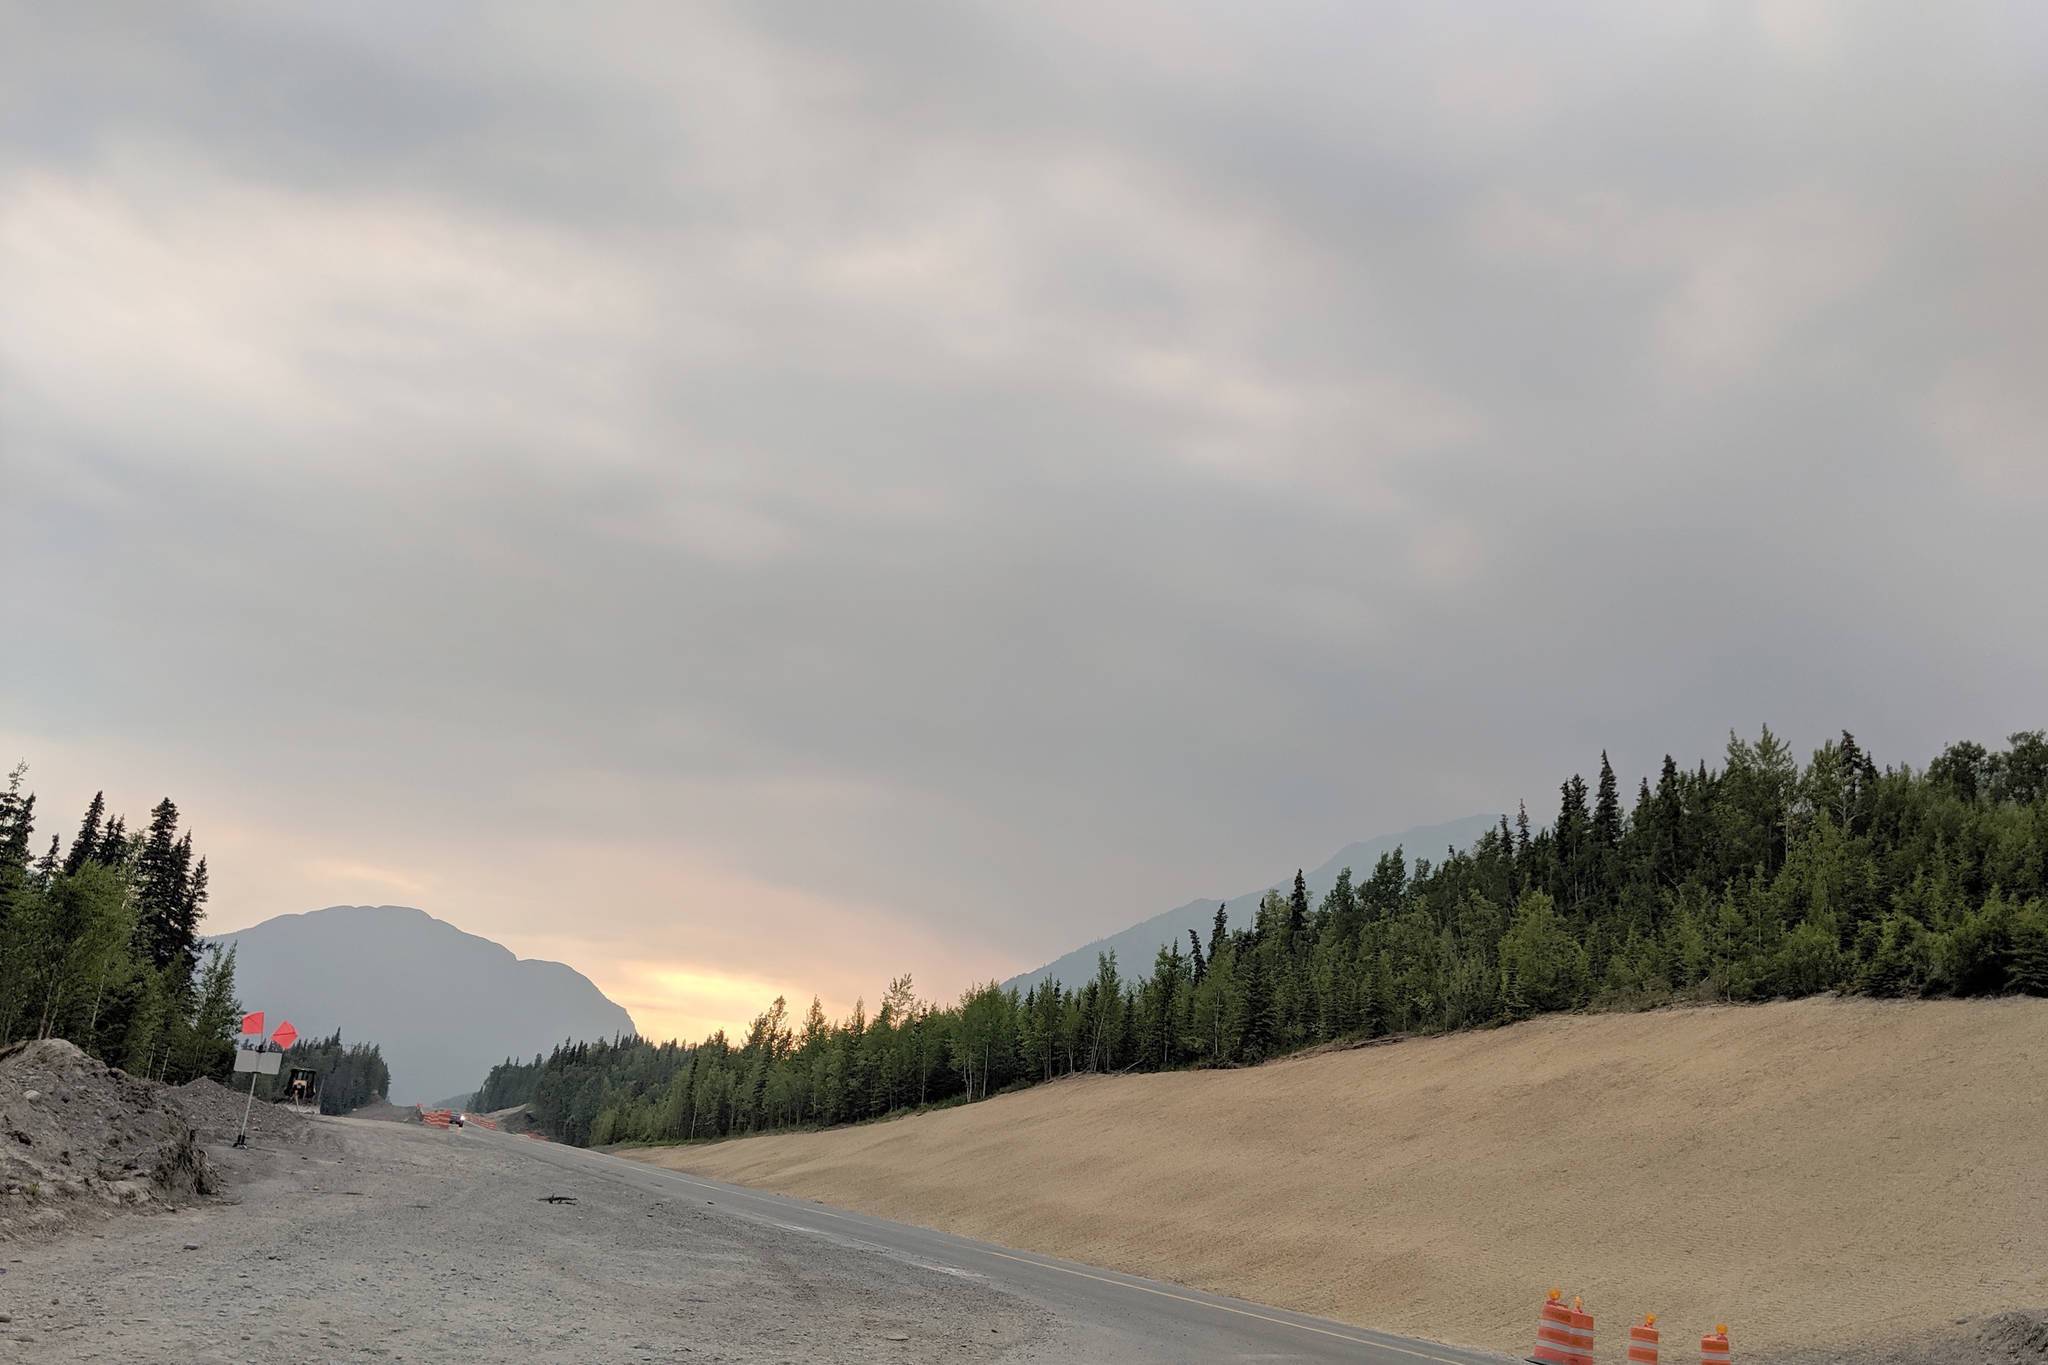 The glow from the Swan Lake Fire can be seen on the horizon from the east entrance of Skilak Lake Road on Sunday, June 23, 2019. The Swan Lake Fire, located just north of Sterling, Alaska, grew to 32,300 acres over the weekend. (Photo by Erin Thompson/Peninsula Clarion)